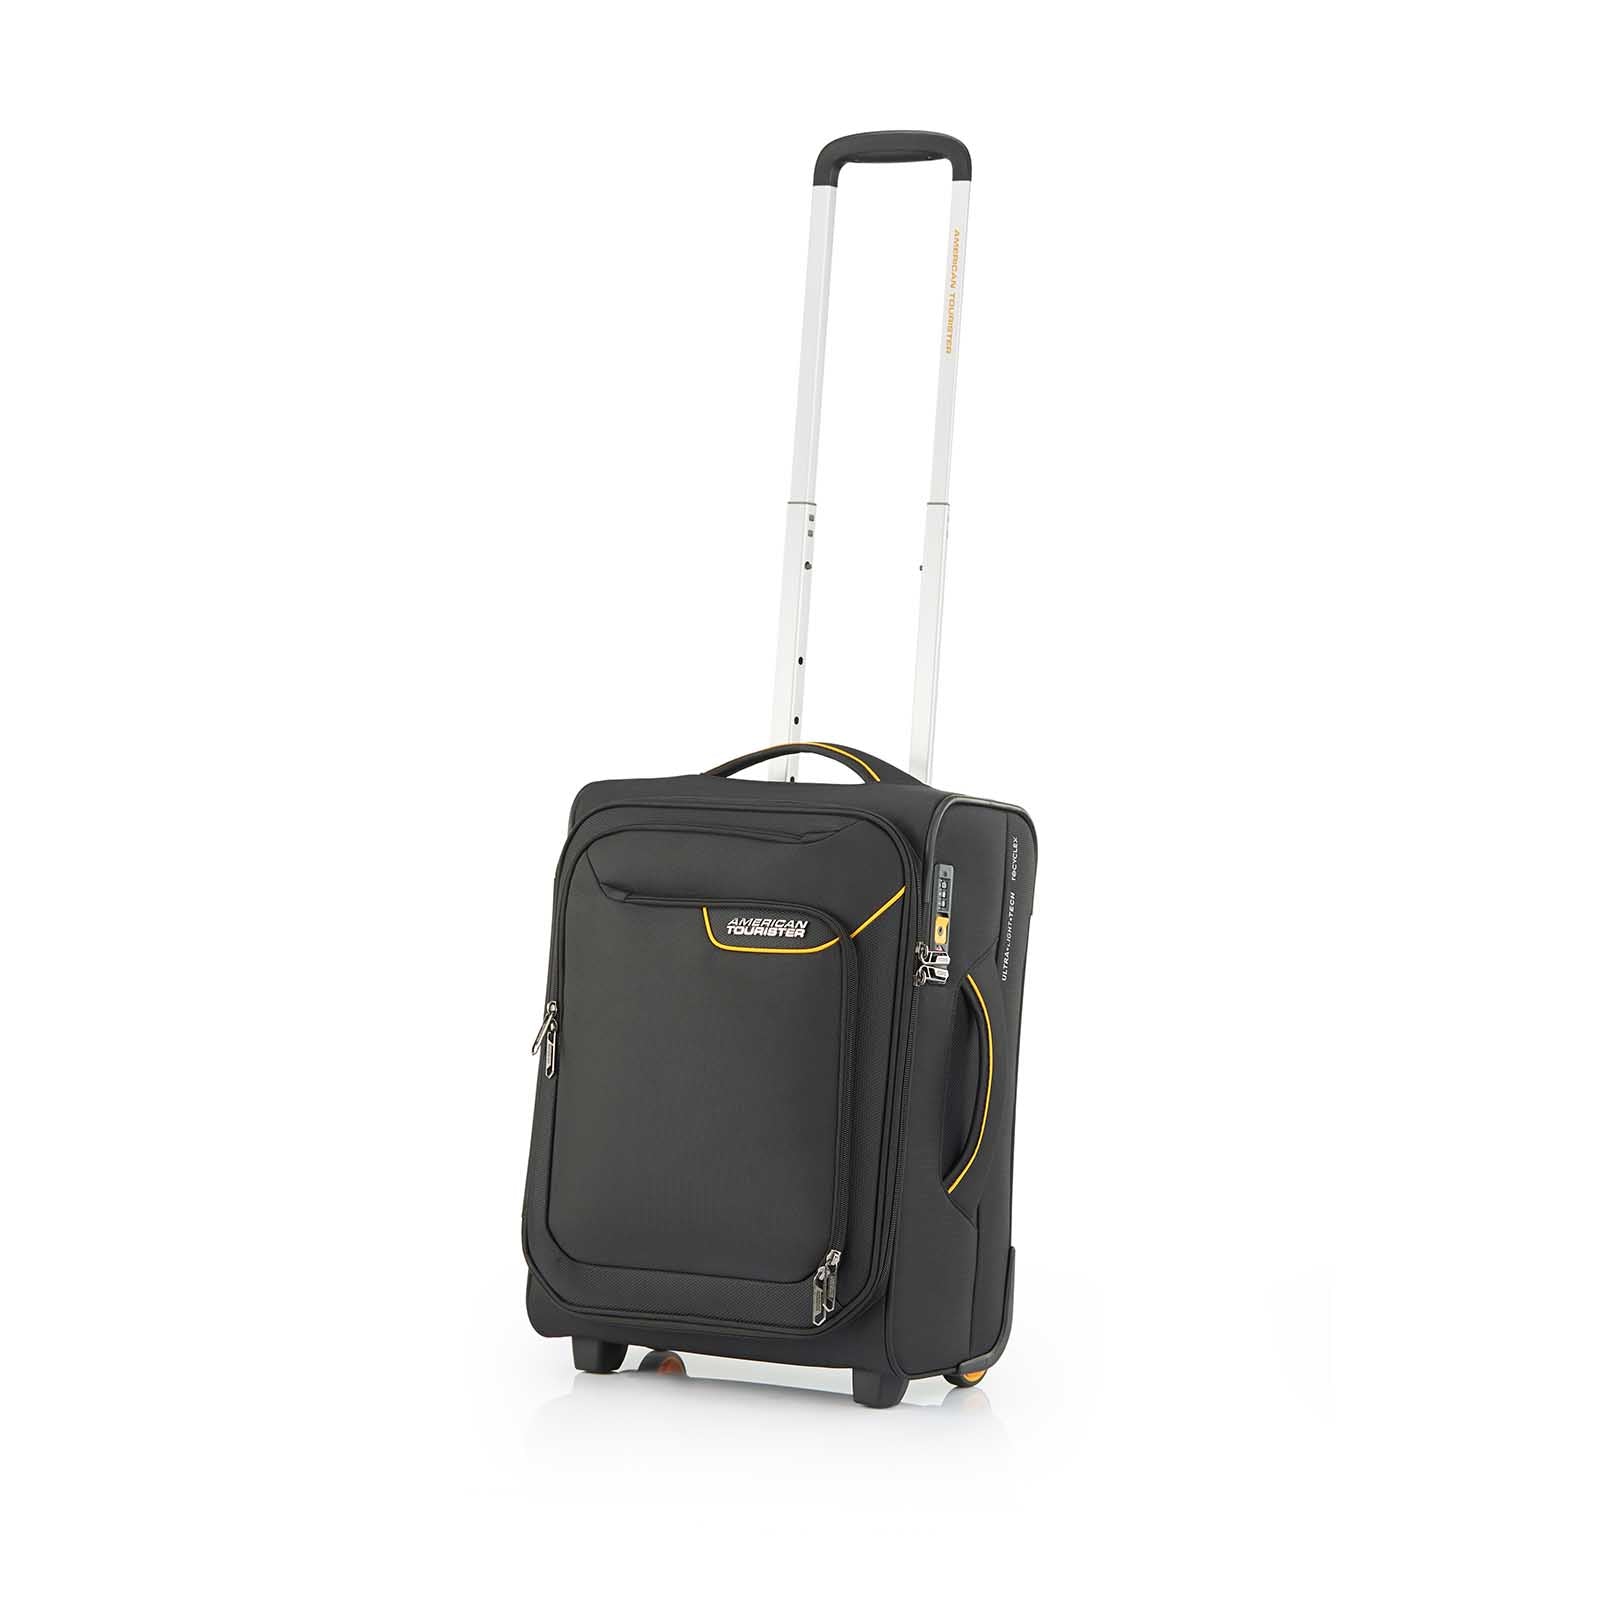 American-Tourister-Applite-4-Eco-50cm-Carry-On-Suitcase-Black-Mustard-Front-Angle